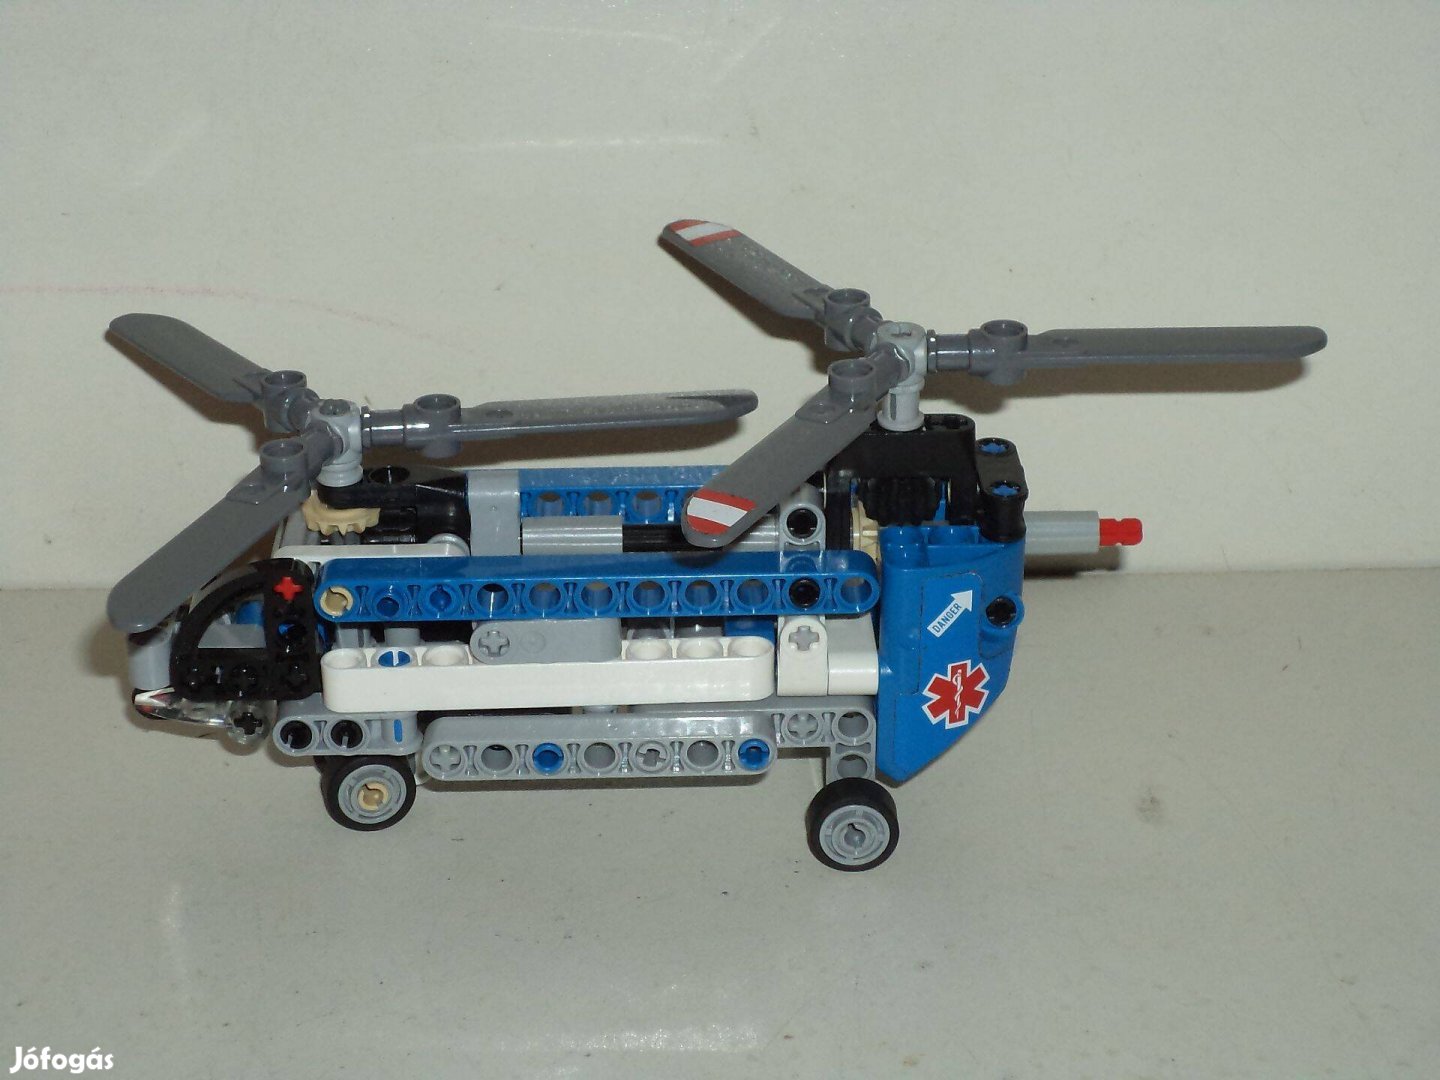 Lego 42020 Twin-rotor Helicopter, Technic